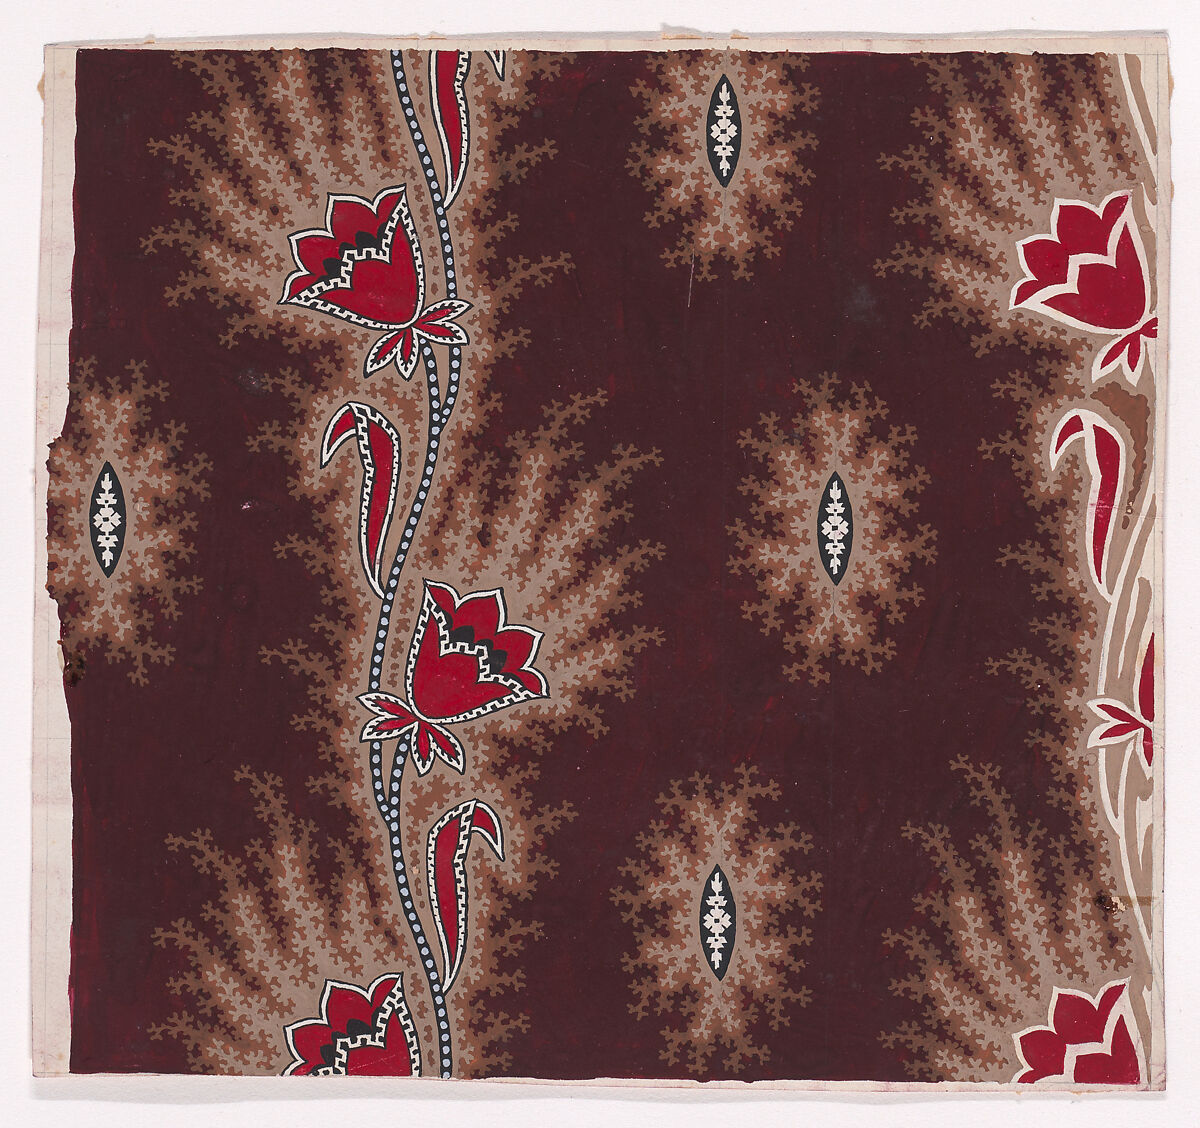 Textile Design with Vertical Garlands of Stylized Flowers and Leaves and Pearls with Offsetting Branches Separated by Vertical Rows of Alternating Shuttle-Shaped Motifs with a Small Rosette Flanked by Two Leaves with Offsetting Branches, Anonymous, Alsatian, 19th century, Gouache 